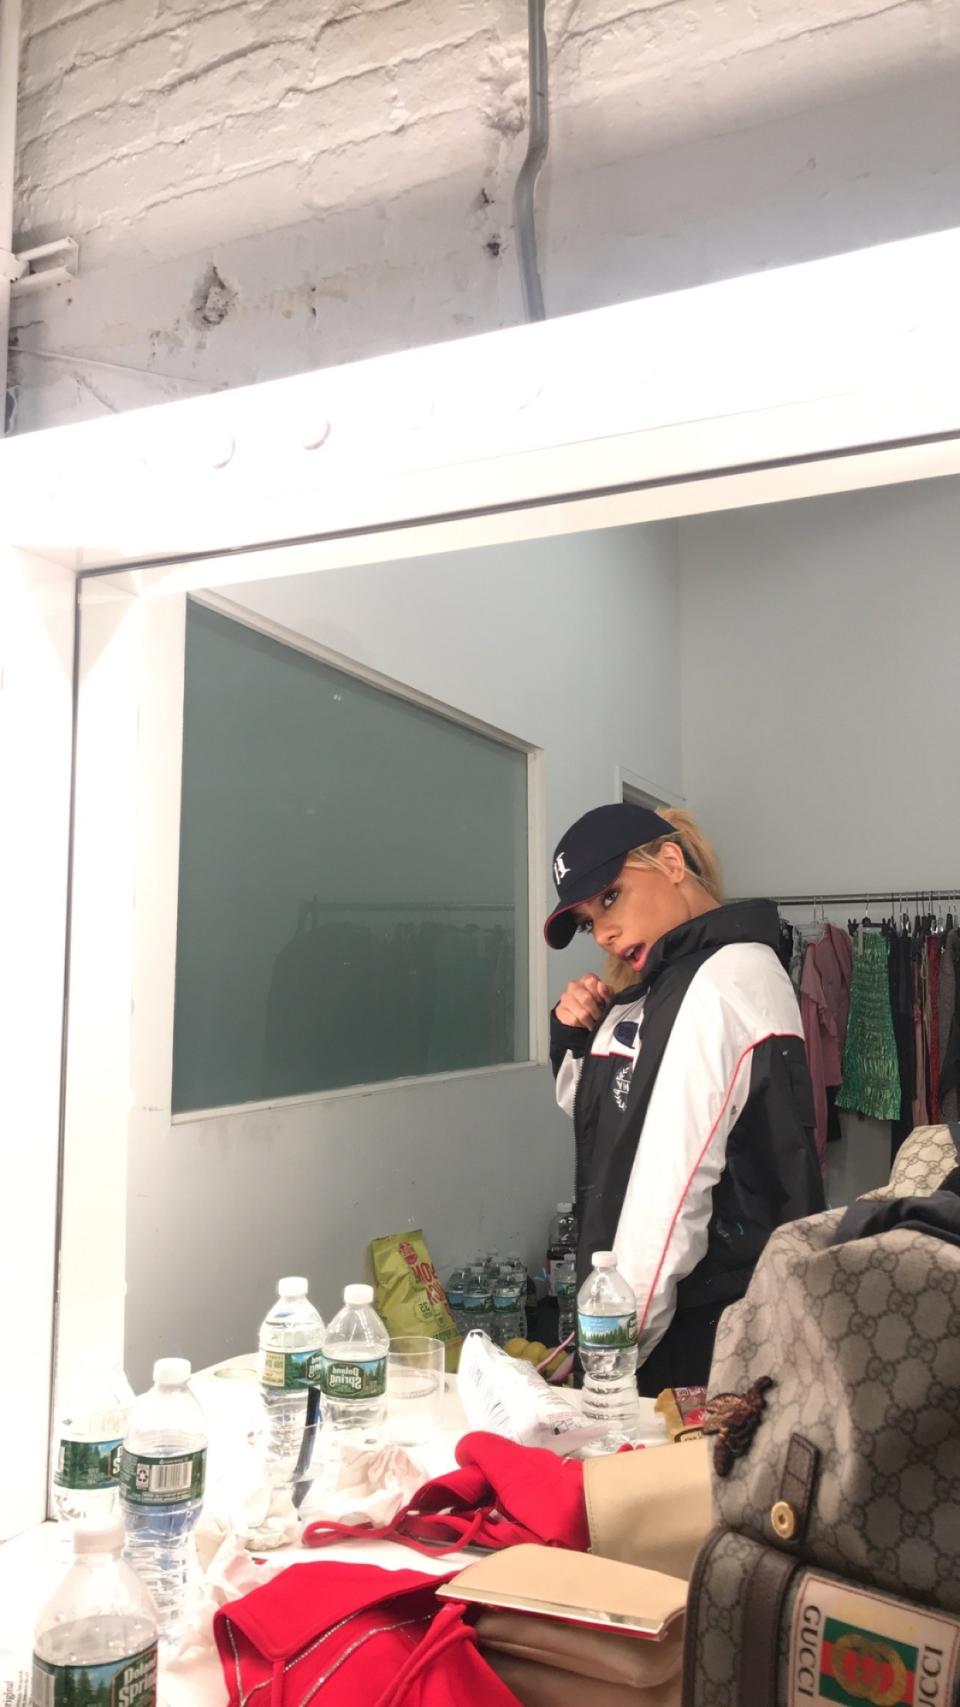 <p>"Behind the scenes: getting ready for my first Bottled Up performance at <em>Teen Vogue</em>'s NYFW party."</p> <p><em>Dinah takes a moment to reflect before hitting the stage for an unforgettable performance at the Body Party event.</em></p>